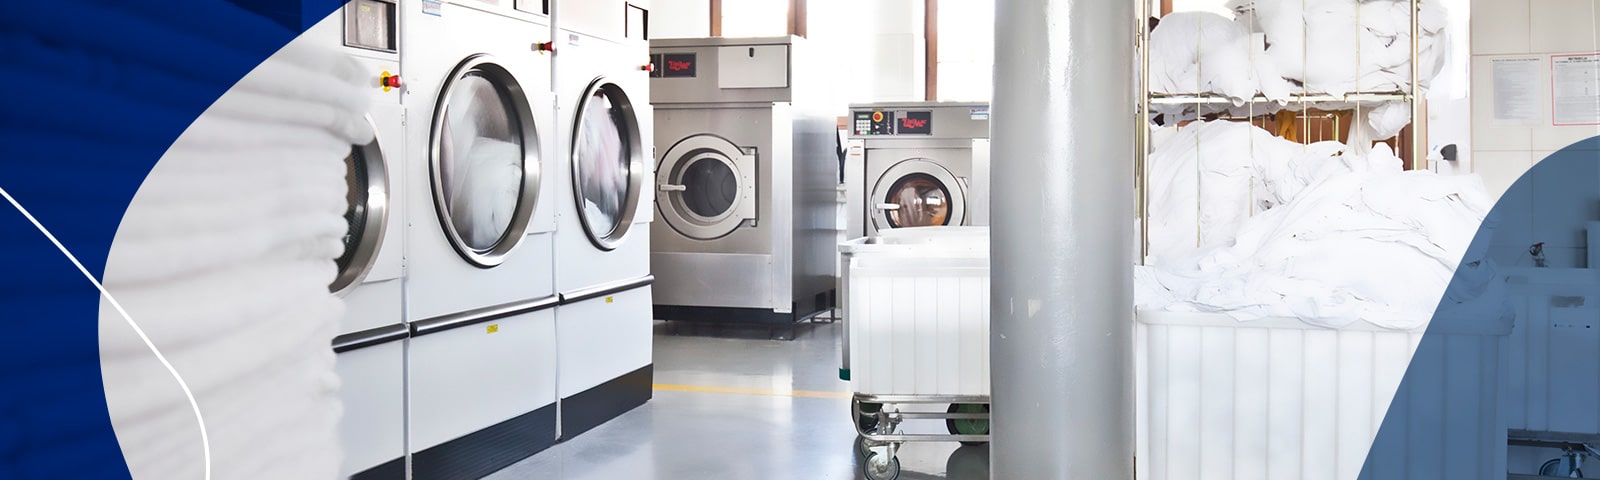 Industrial laundry products